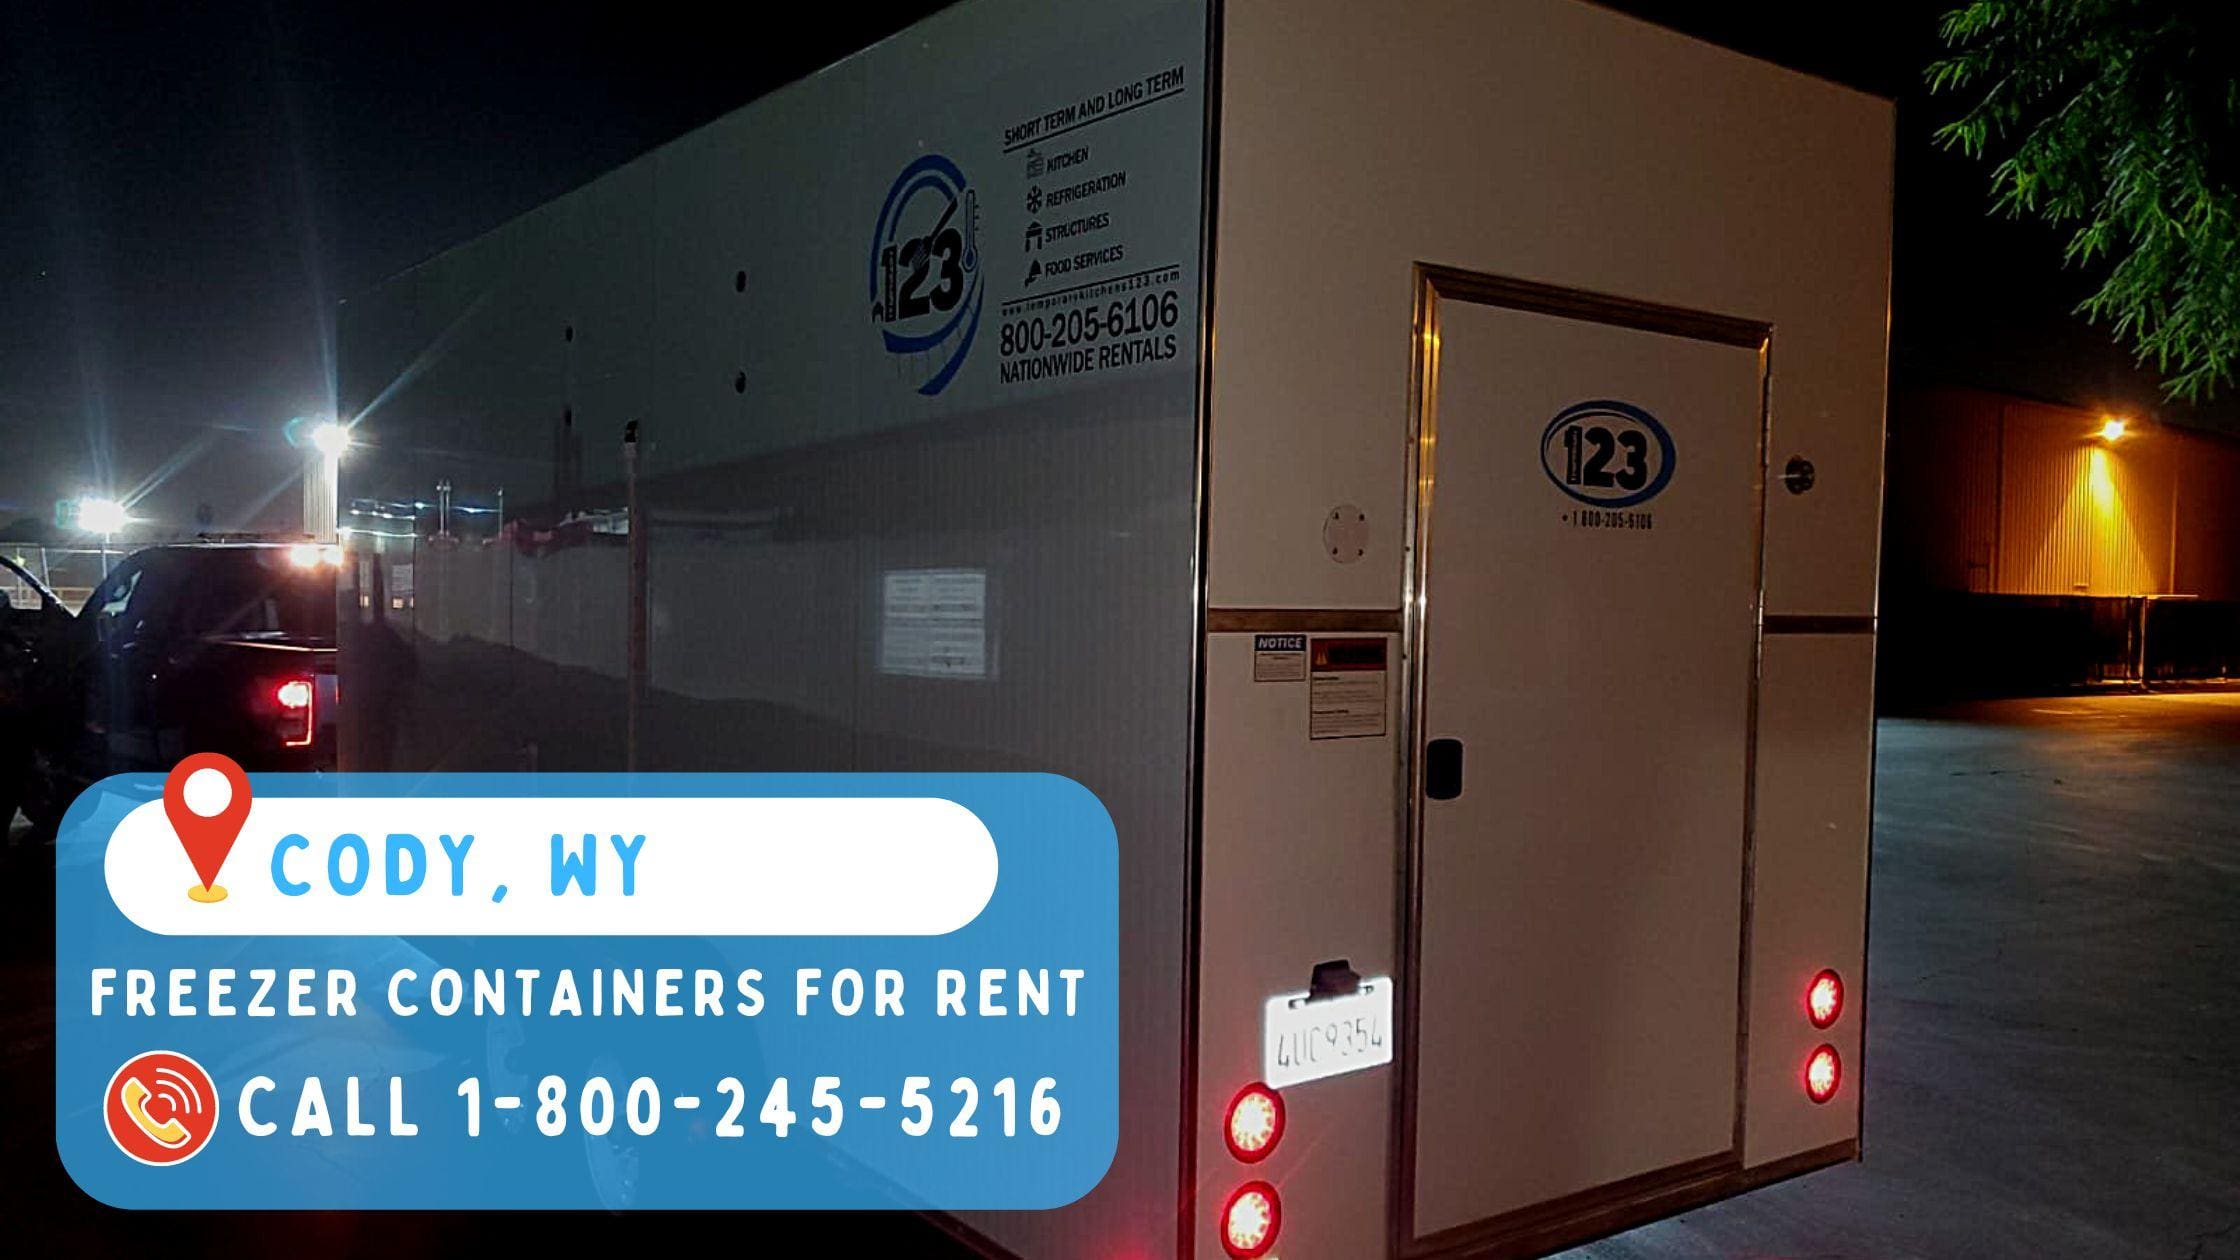 Freezer containers for rent in Cody, WY